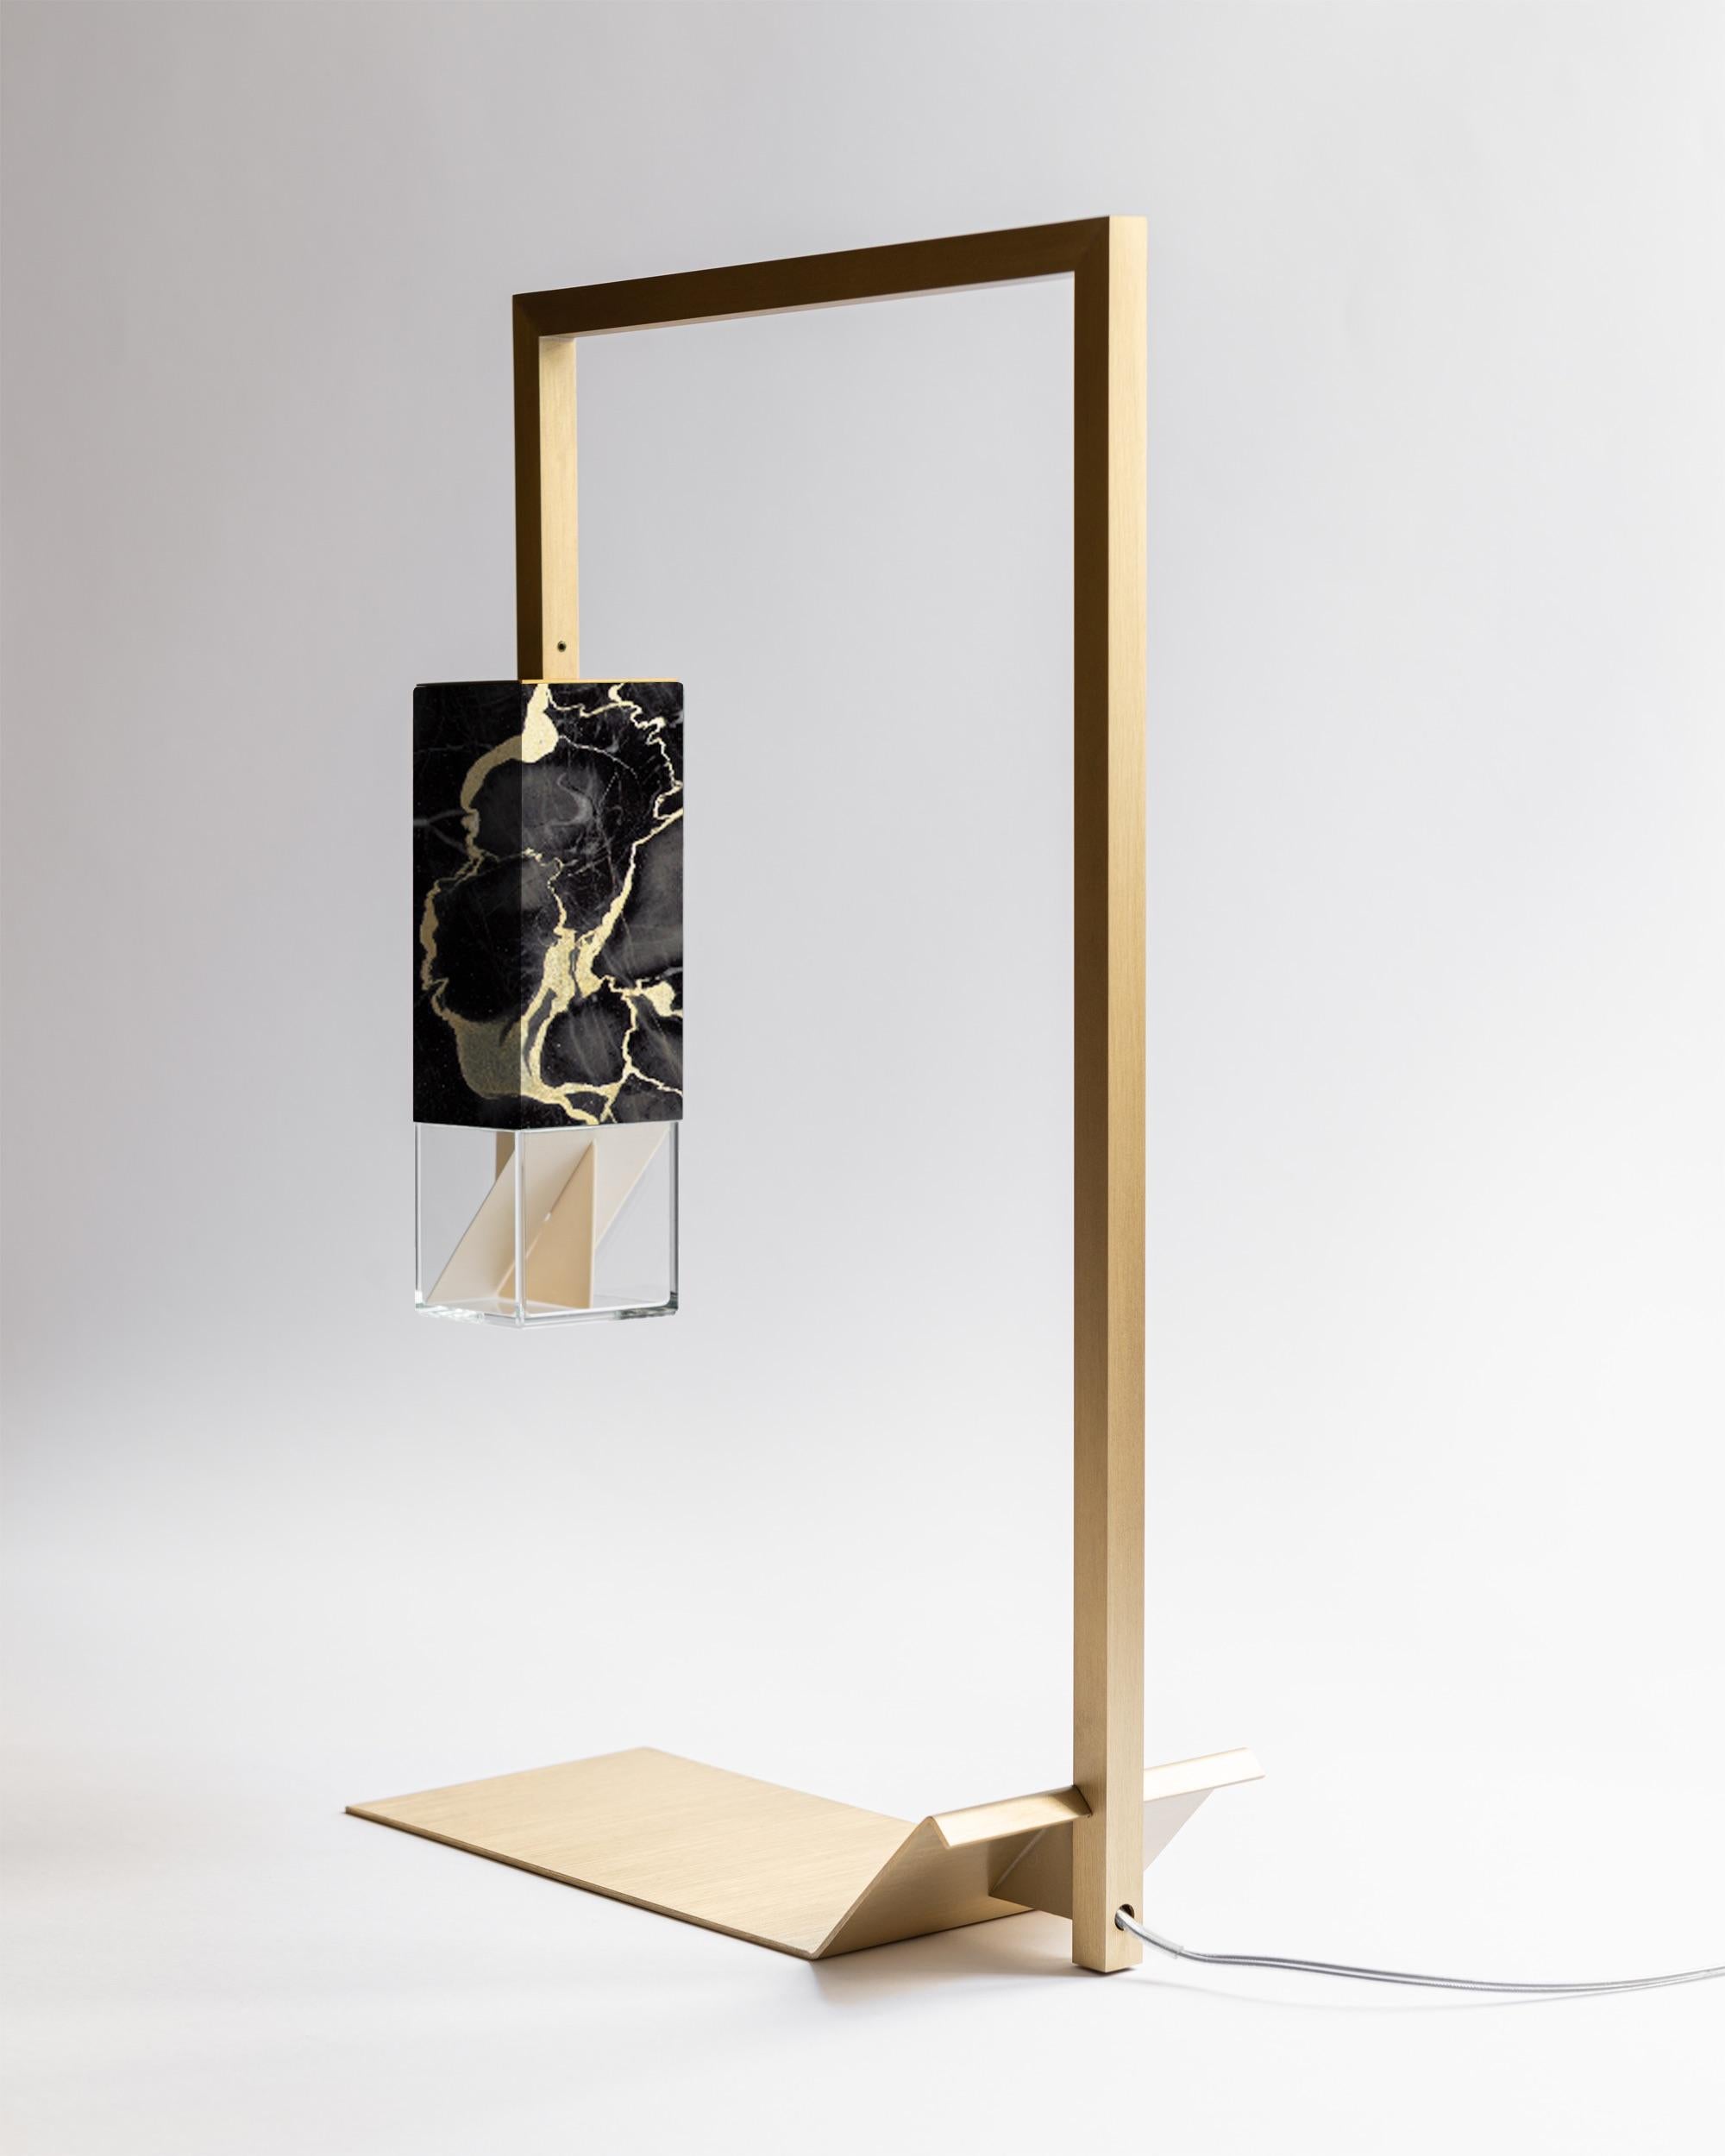 About
Contemporary Gold Black Marble Handmade Table Lamp by Formaminima

Lamp/Two Black Marble from Black Edition
Design by Formaminima
Table light
Materials:
Body lamp handcrafted in solid Black Portoro Gold vein marble / crystal glass diffuser